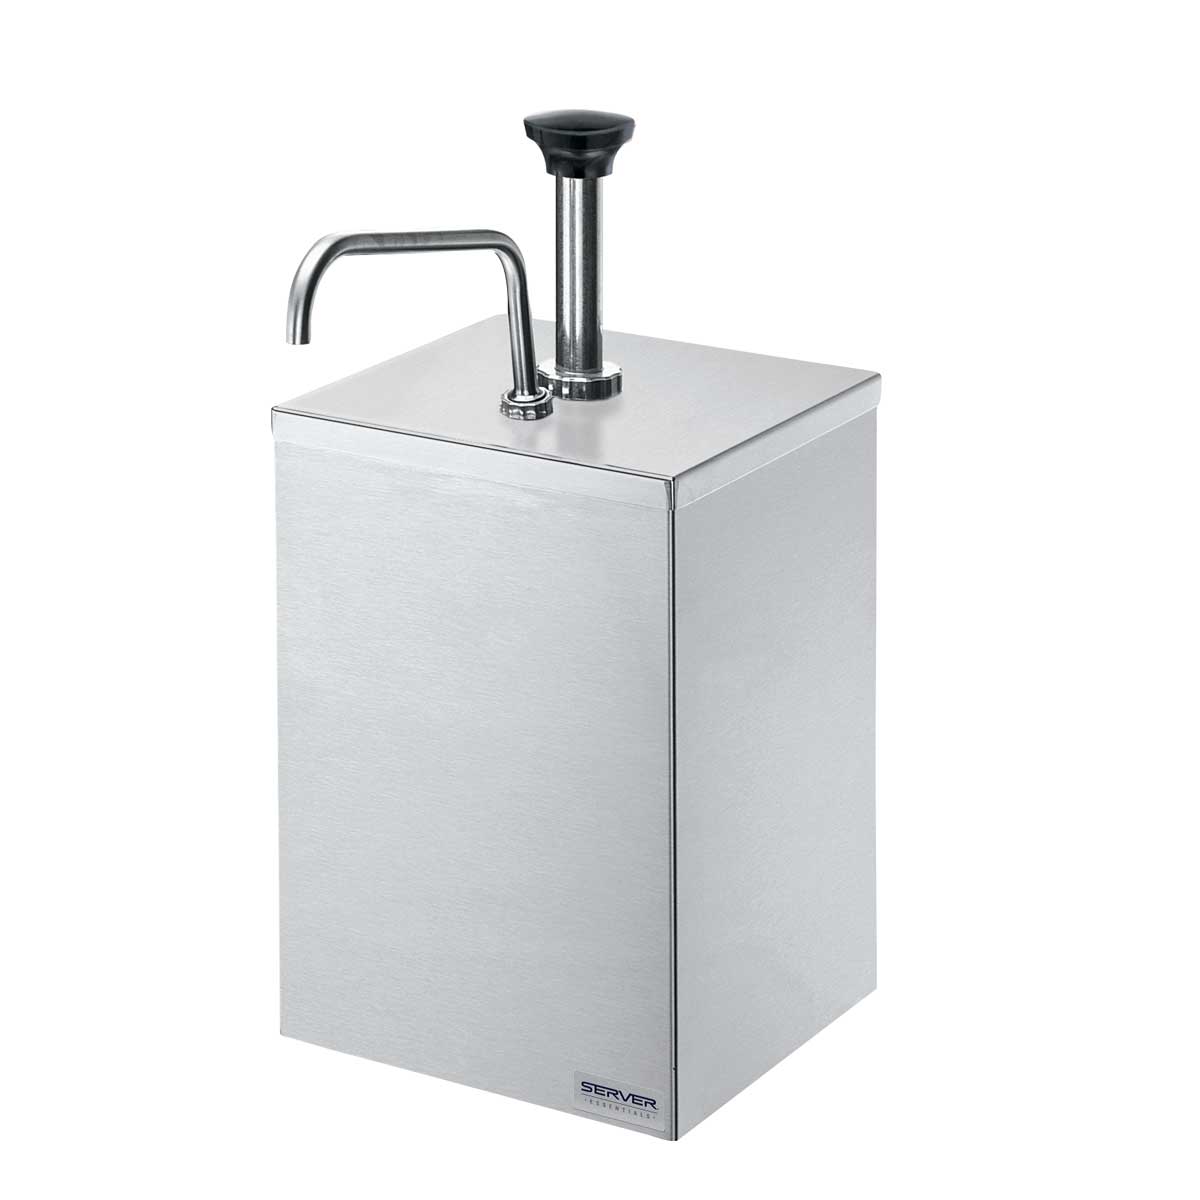 #10 Can Pumps In Stand Stainless Steel